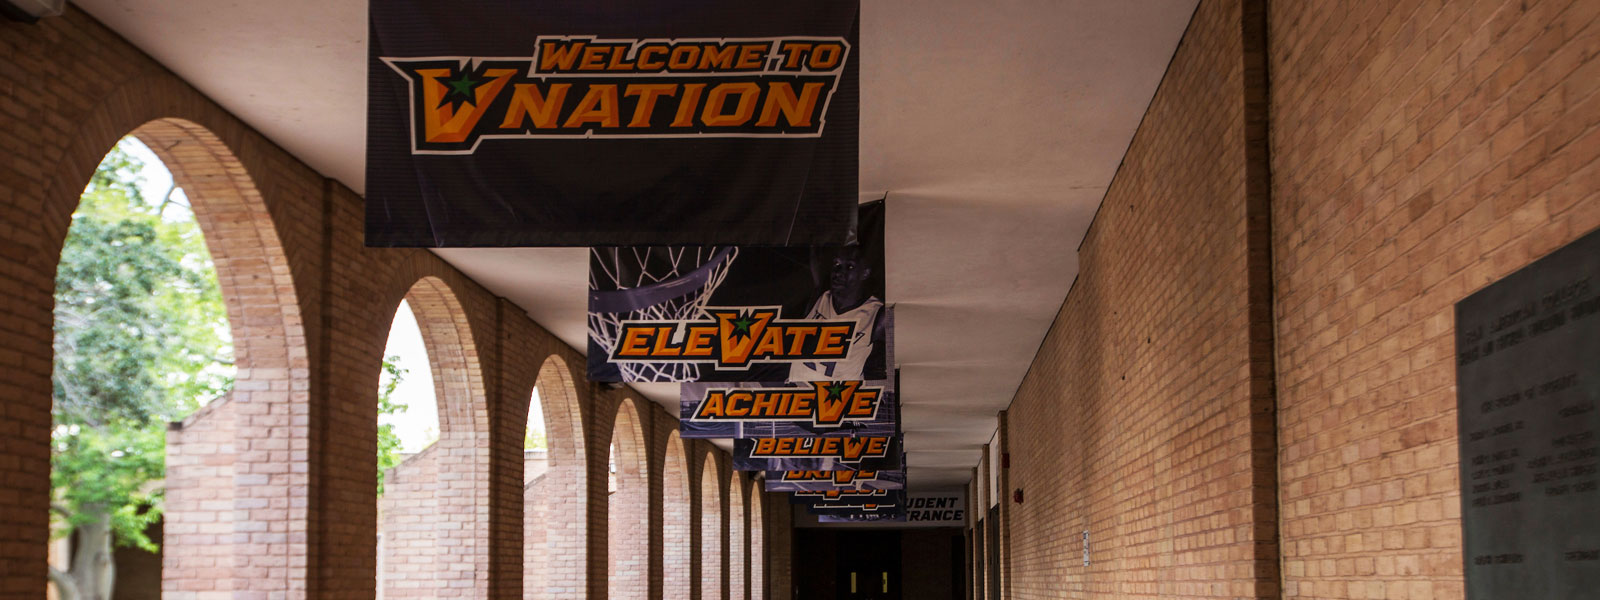 Welcome to V Nation flag hangs outside Education Complex building